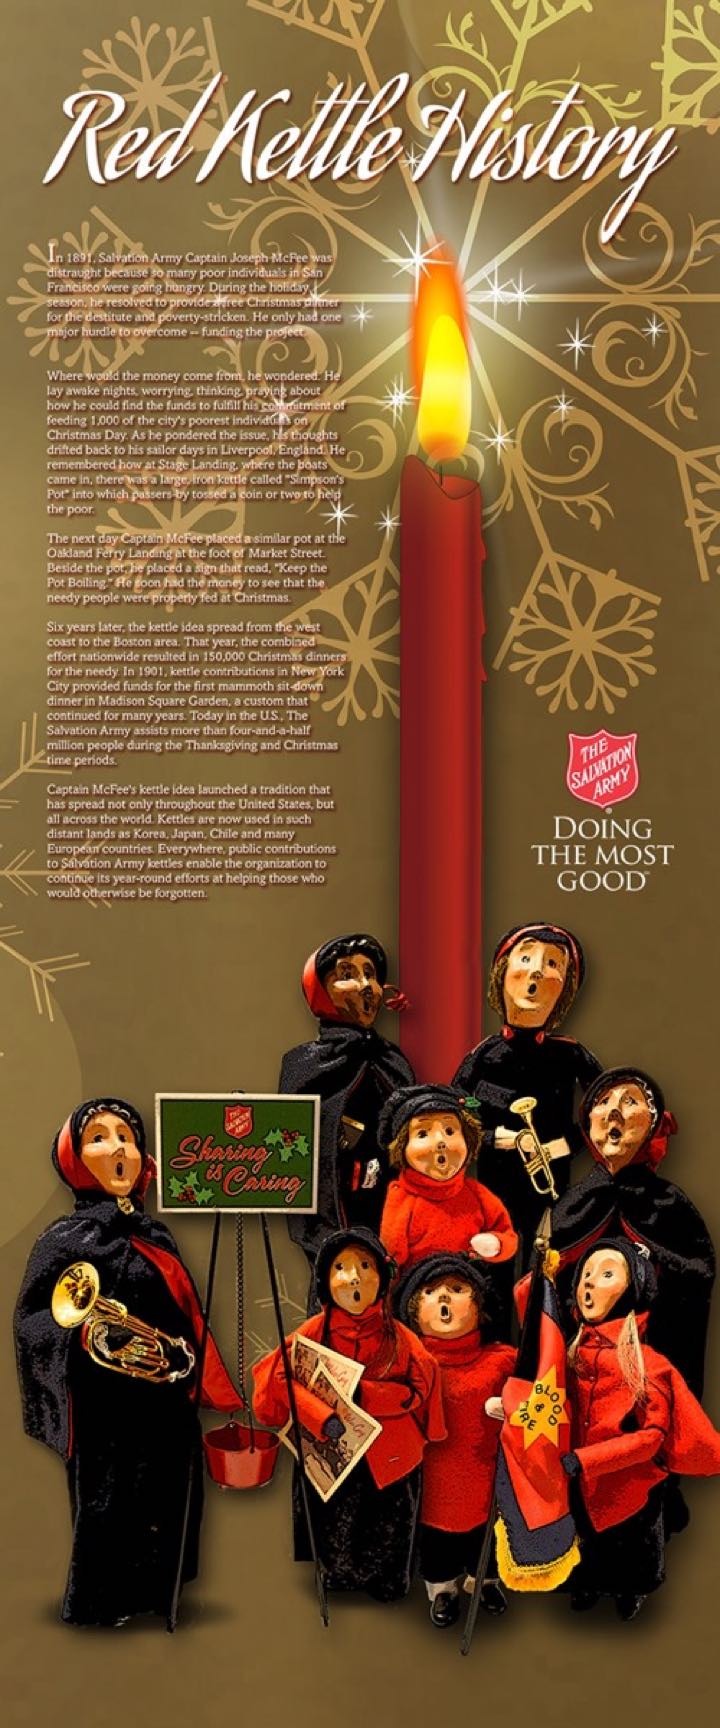 Red Kettle History Poster